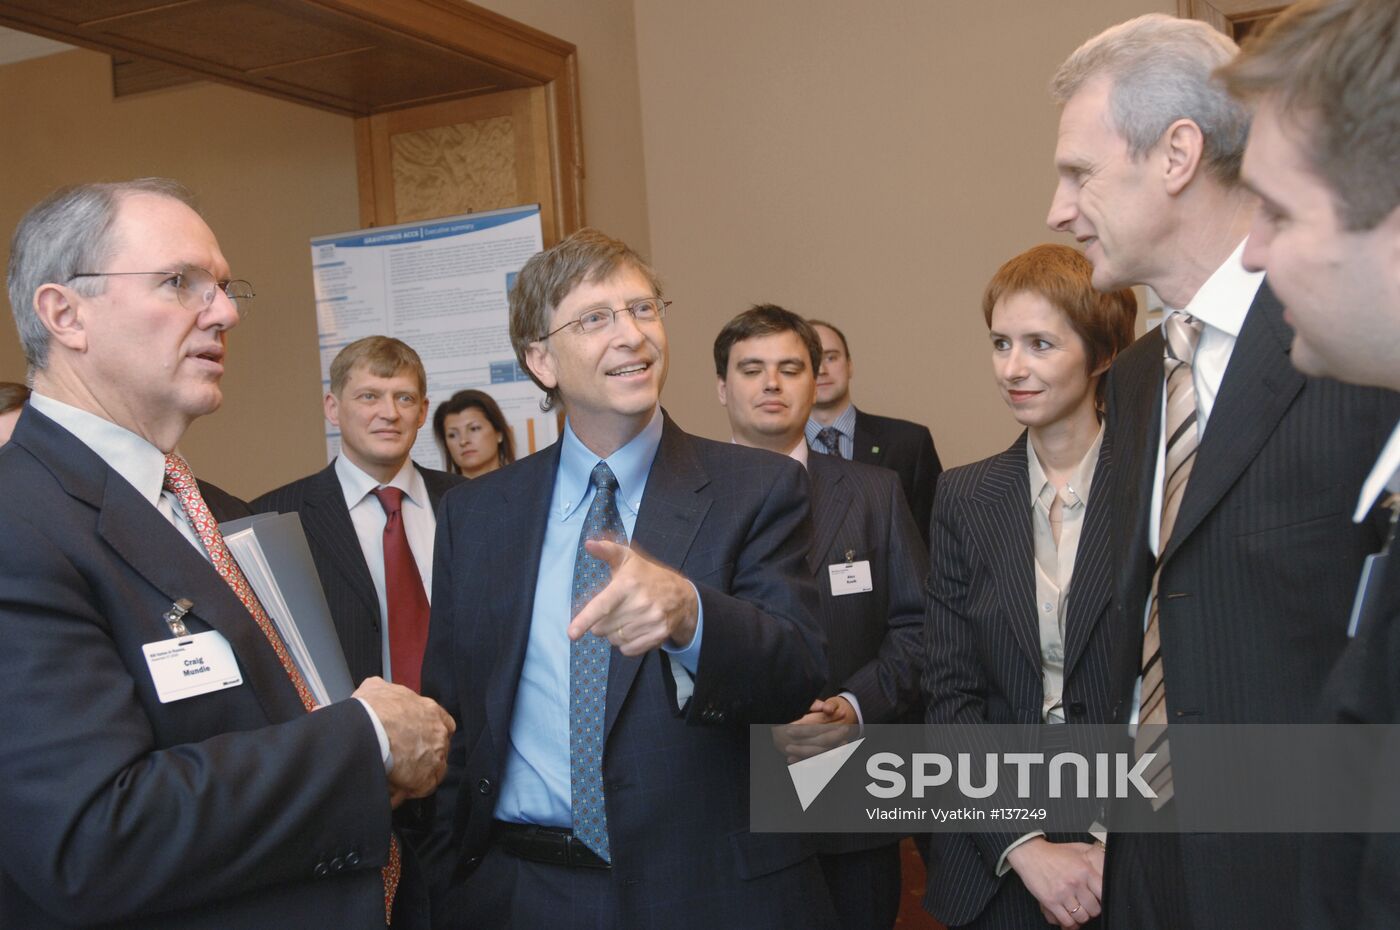 BILL GATES MOSCOW VISIT